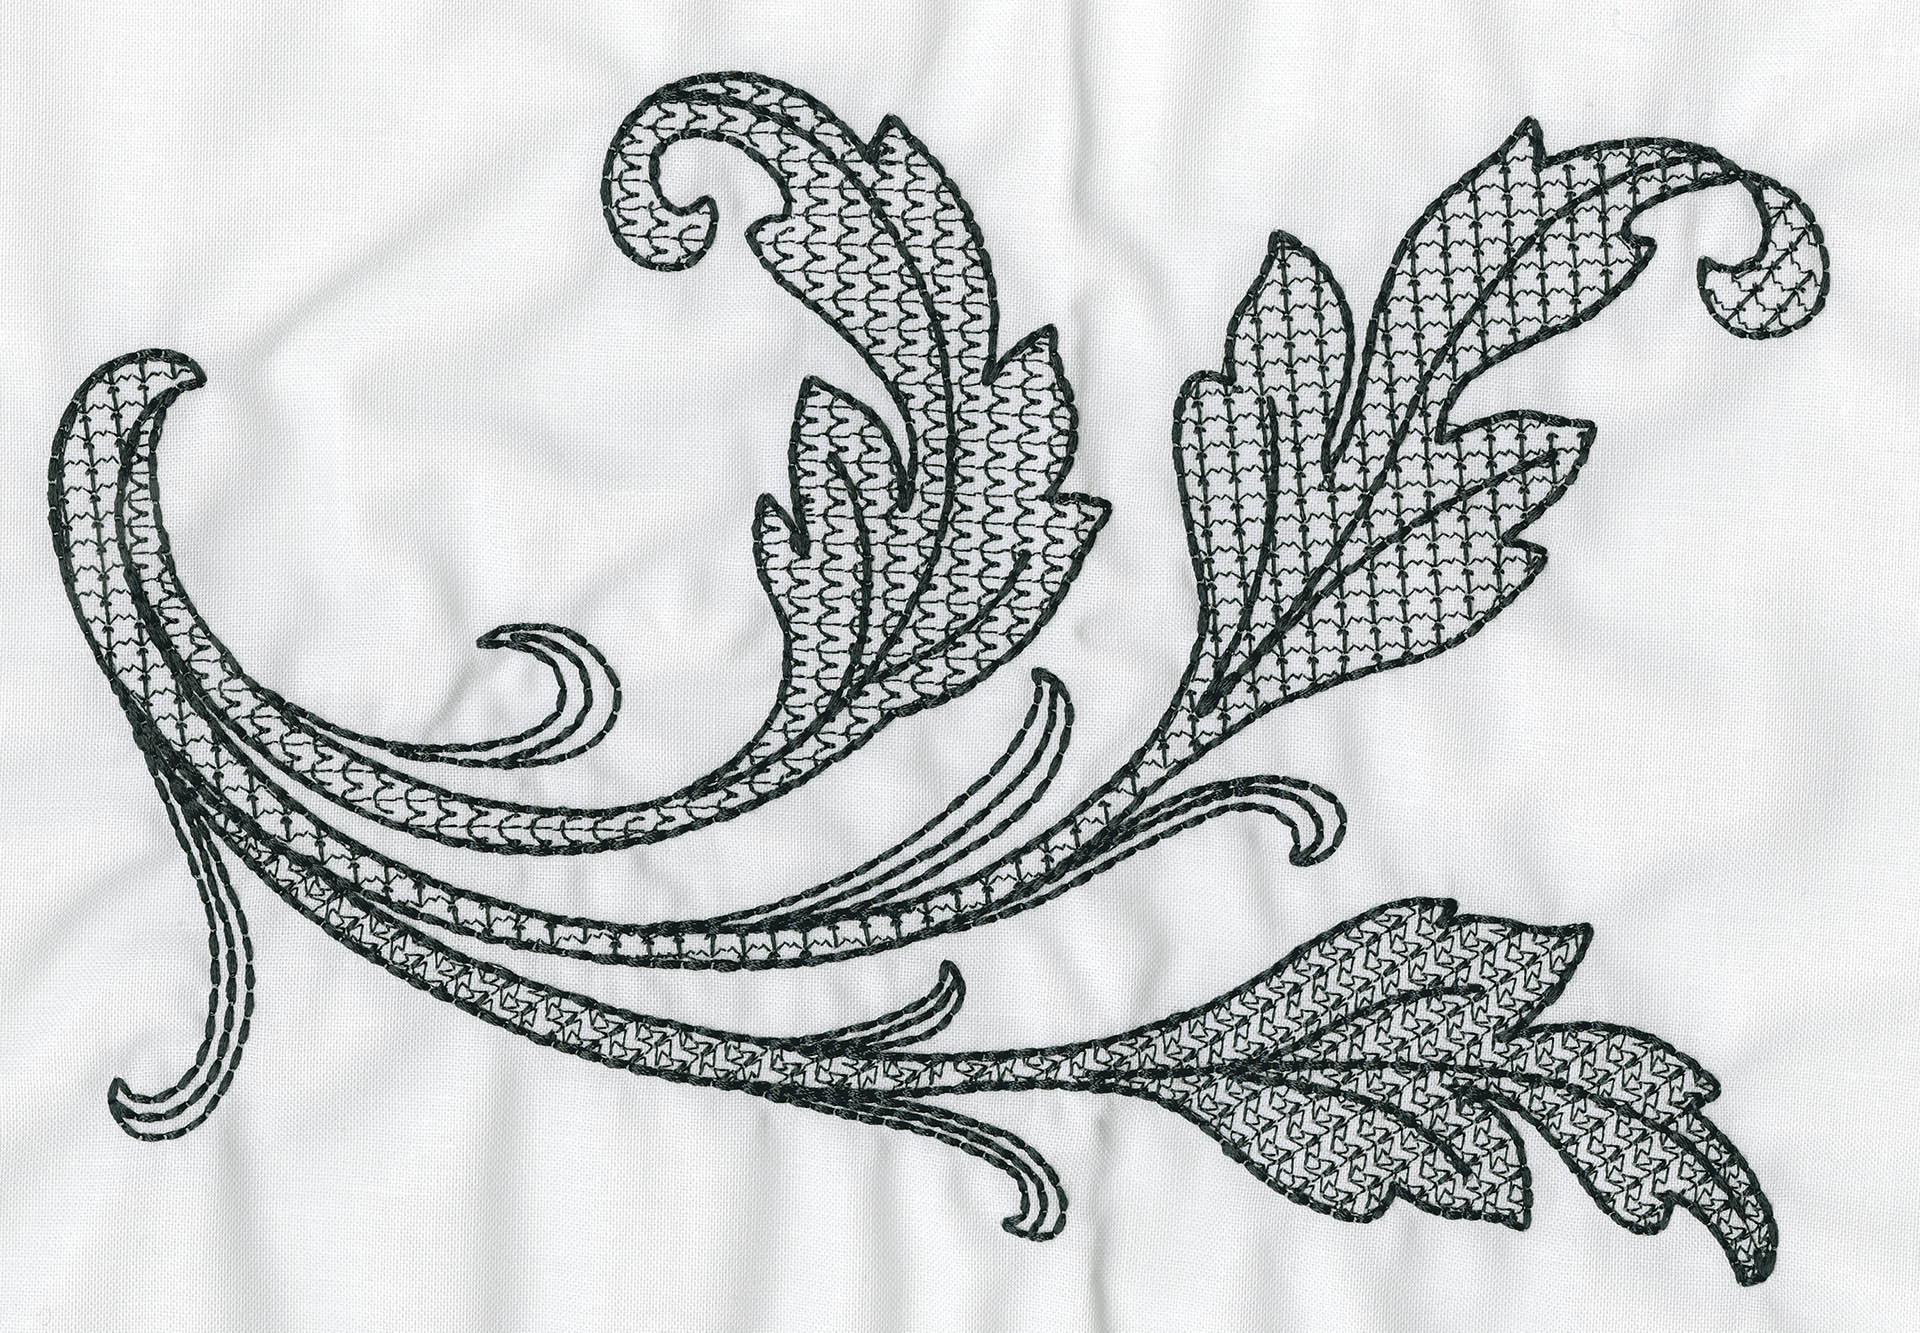 imaginesque free hand embroidery and quilting patterns  Blackwork  embroidery patterns, Quilt patterns, Blackwork embroidery designs